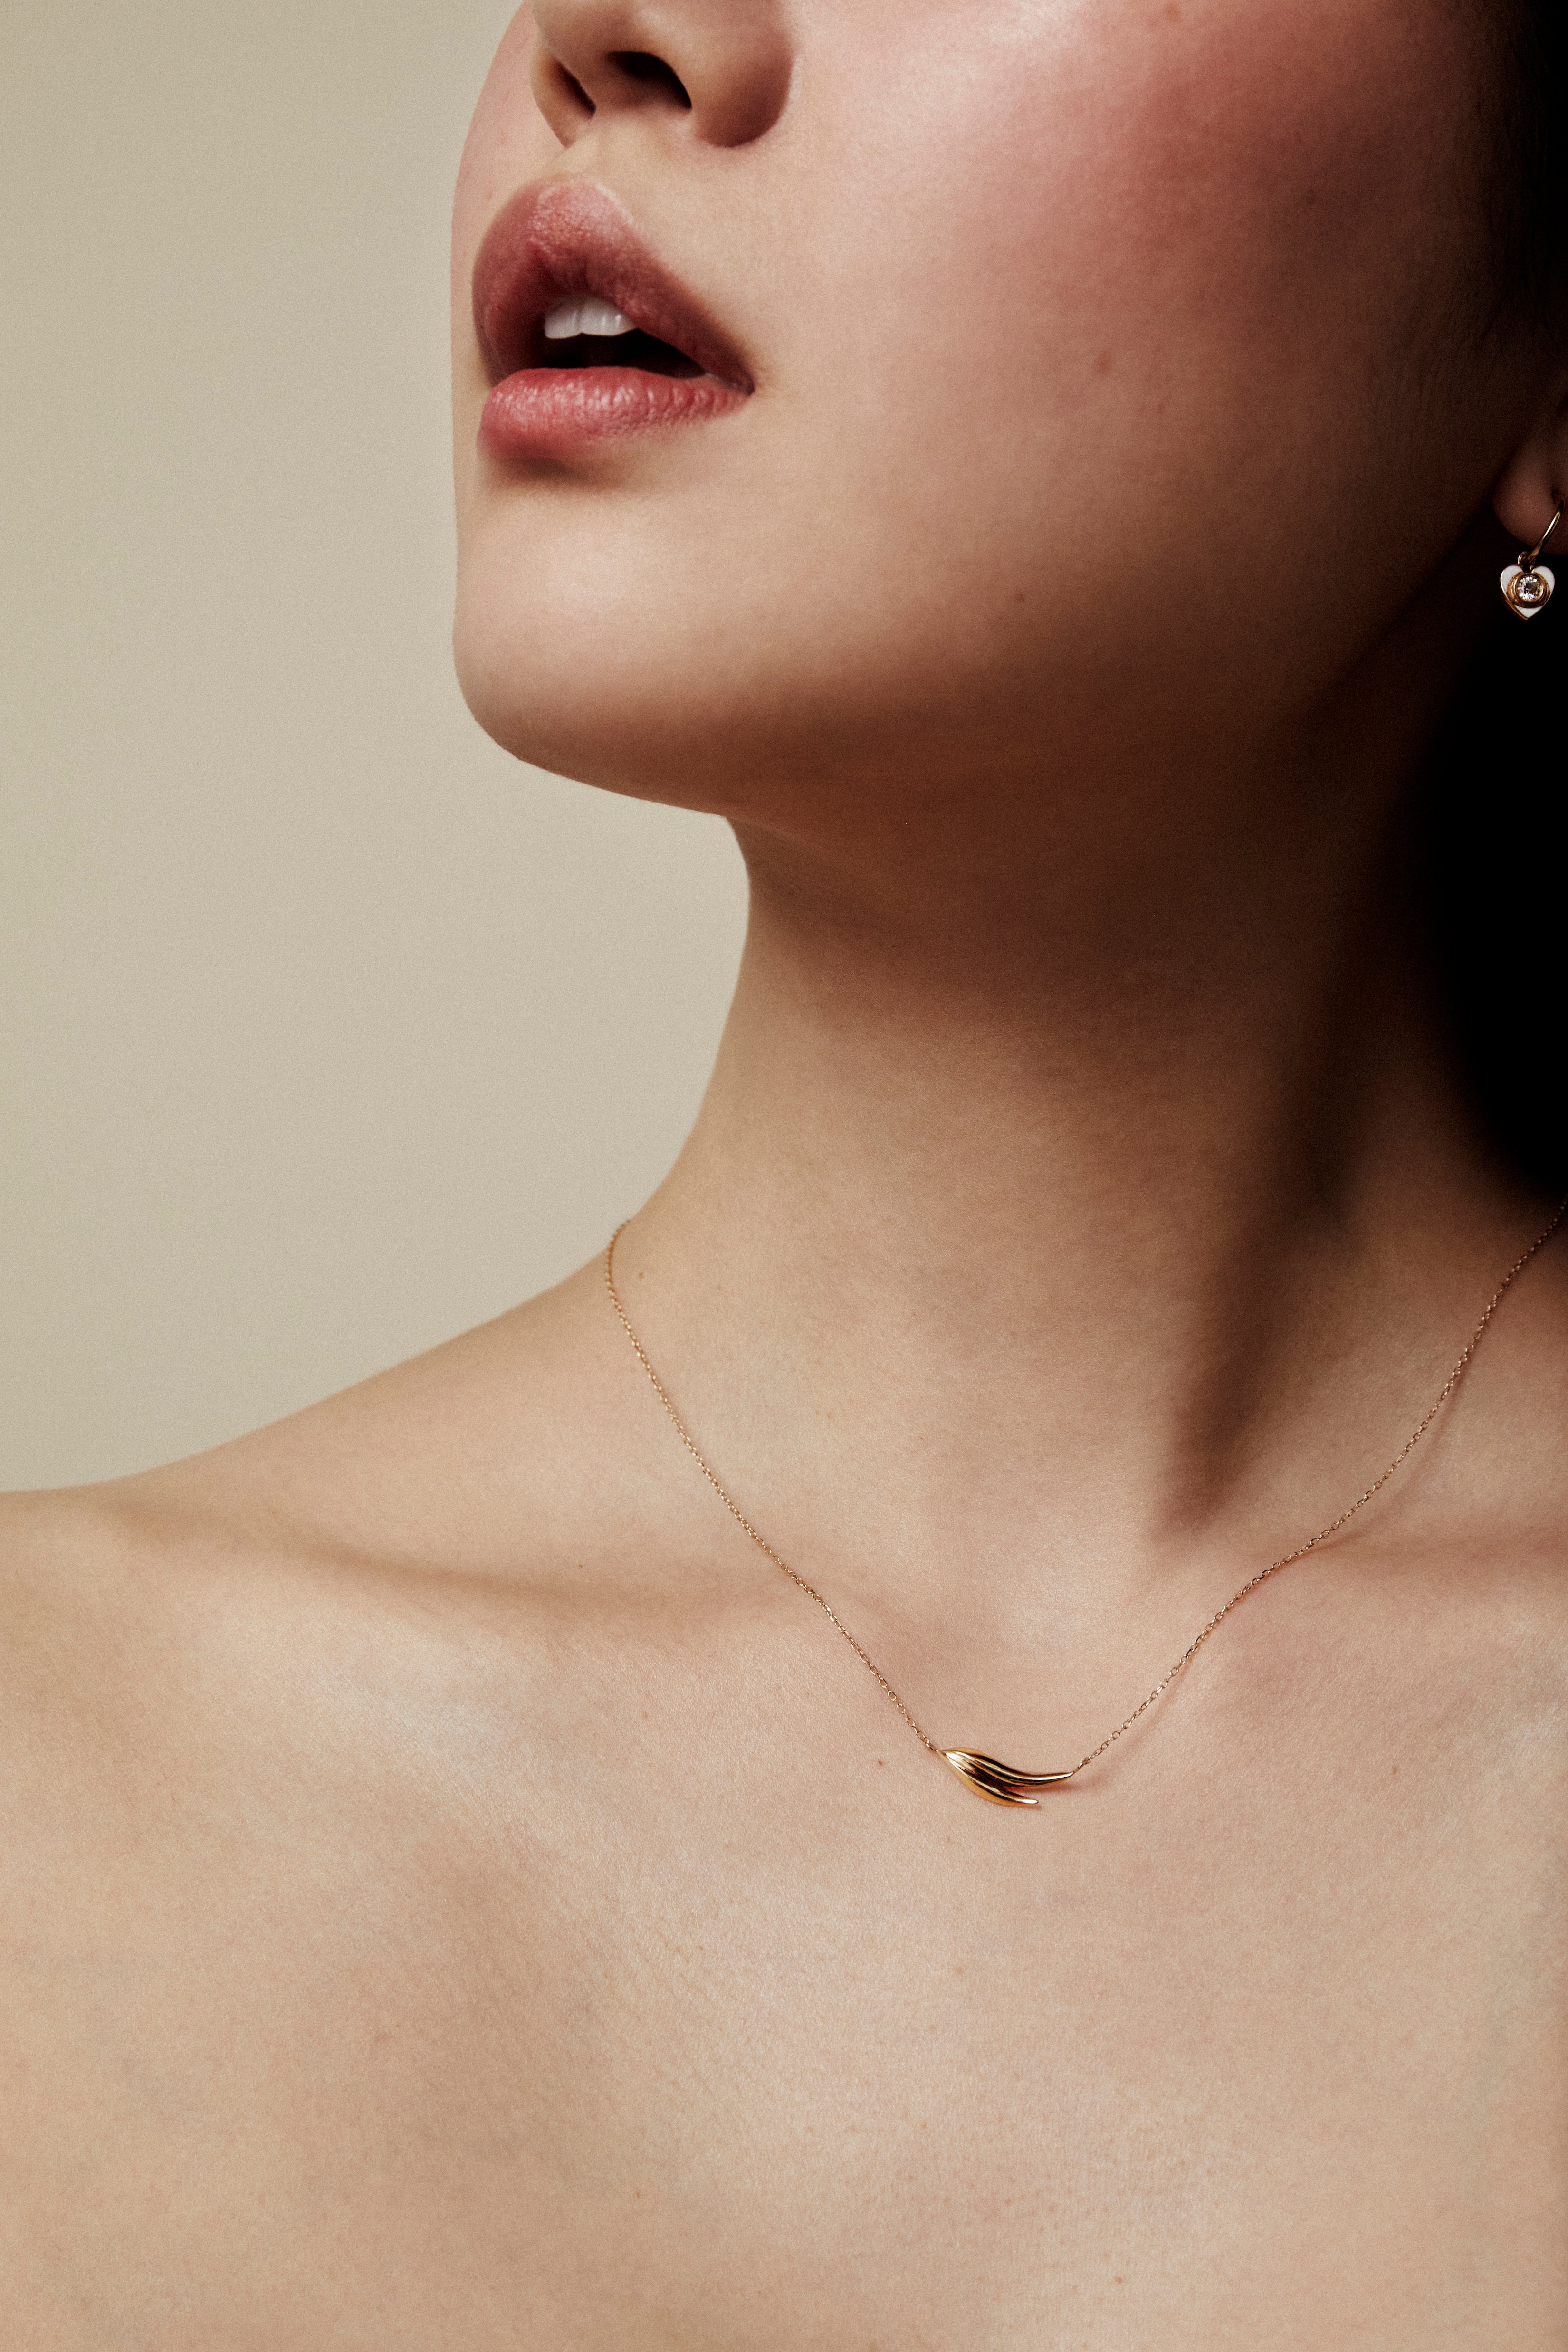 Flame Silhouette Necklace